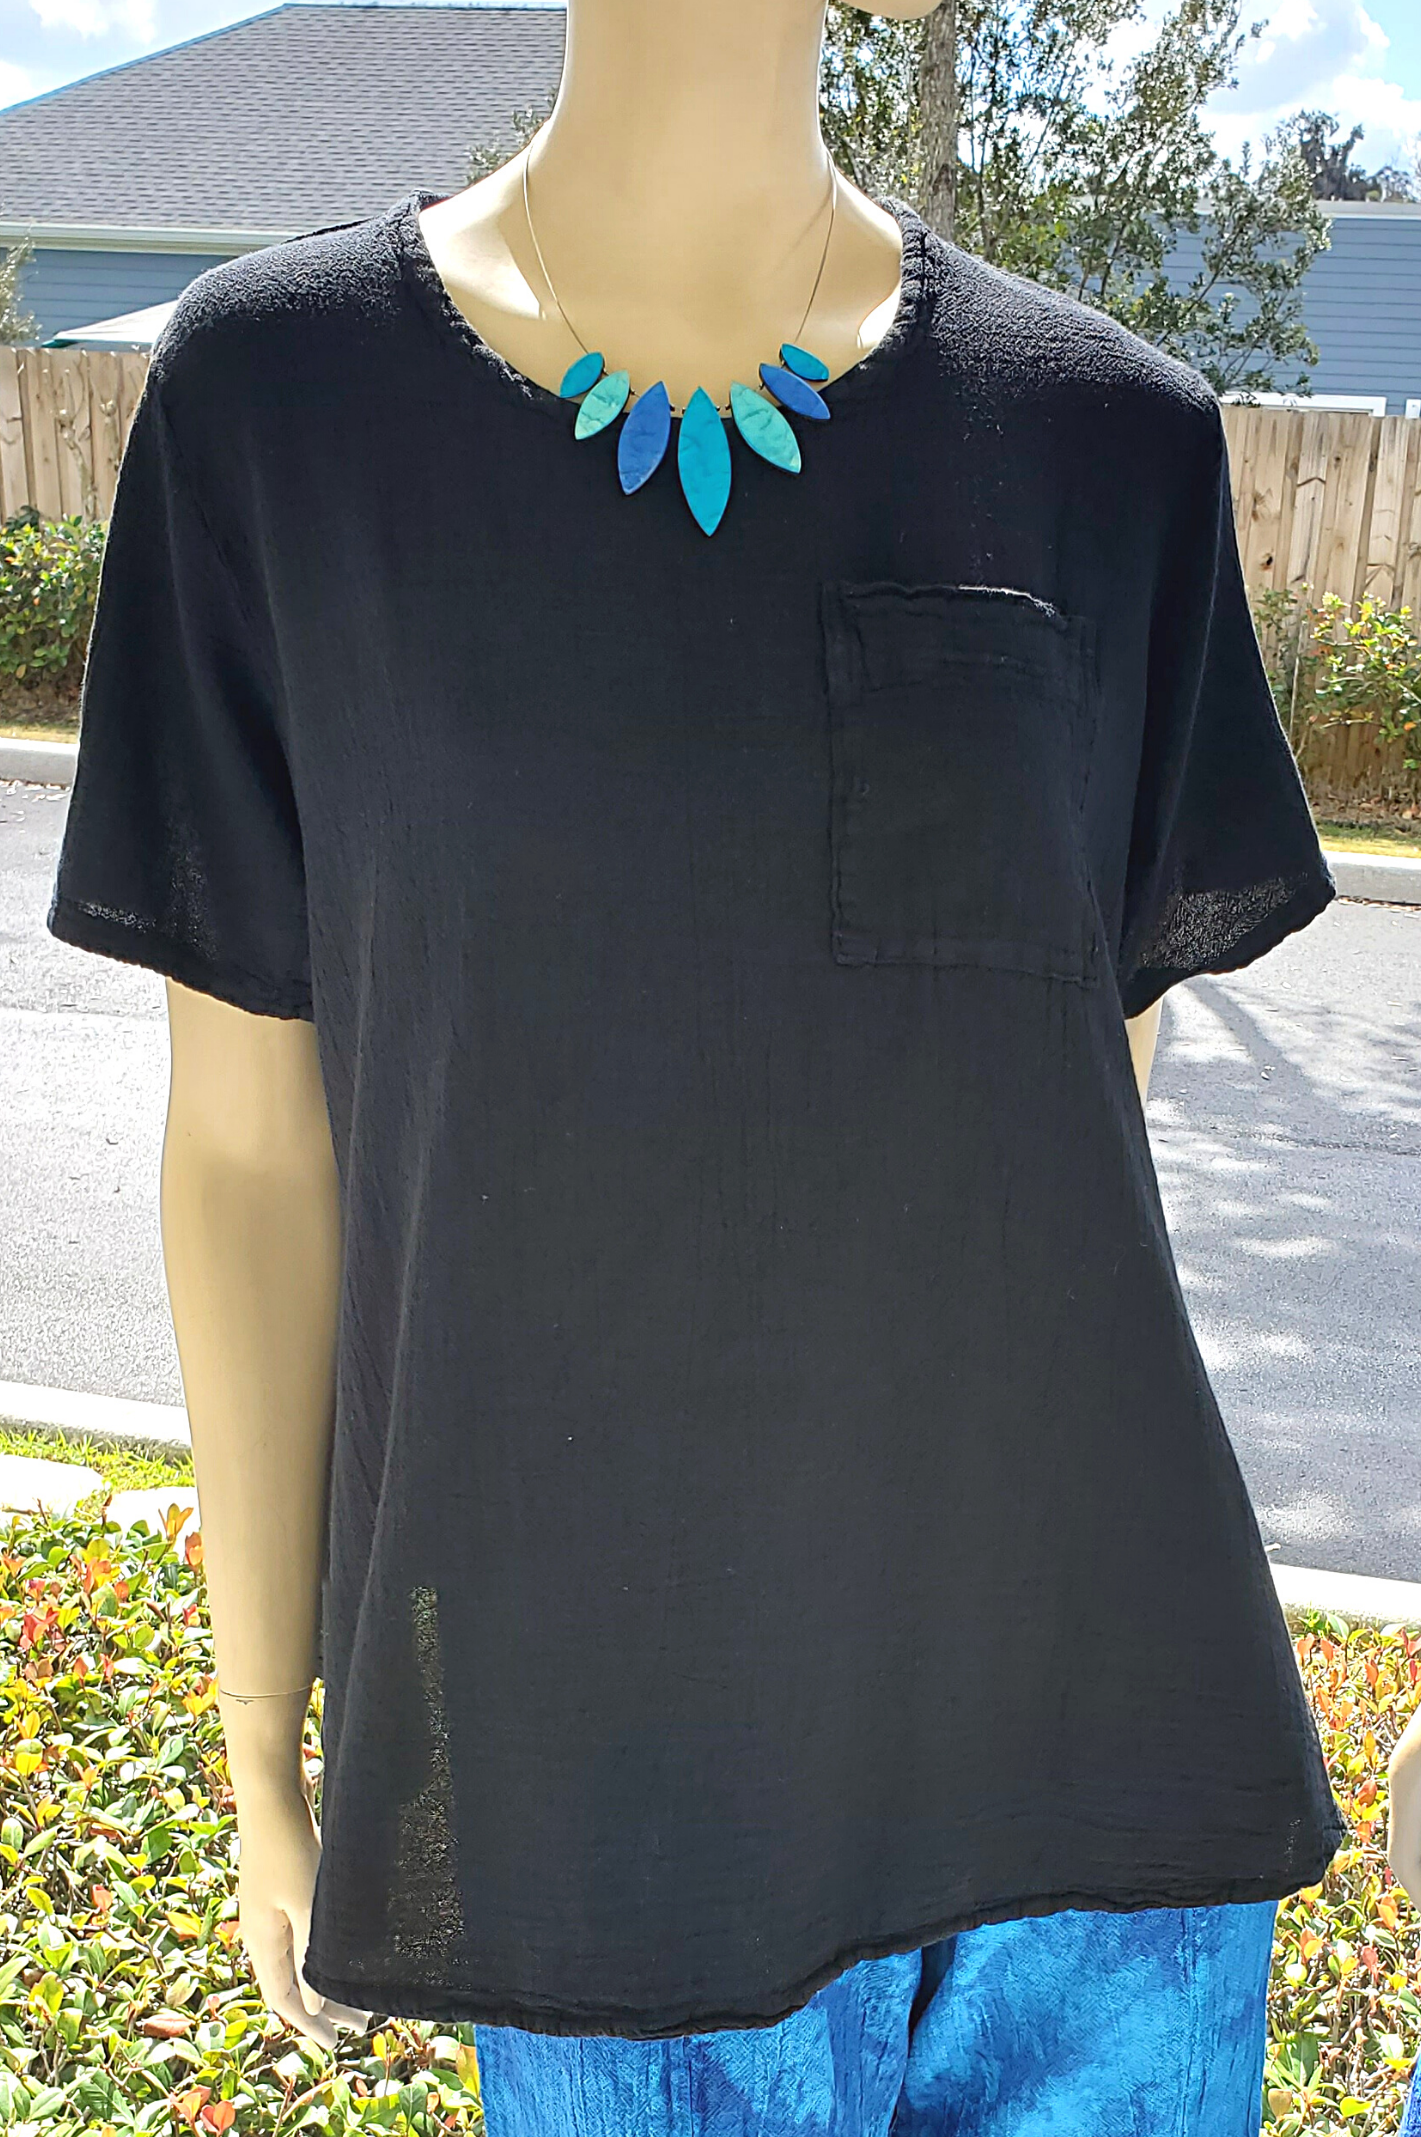 Lauri Top with Pocket Detail! 100% Cotton Gauze